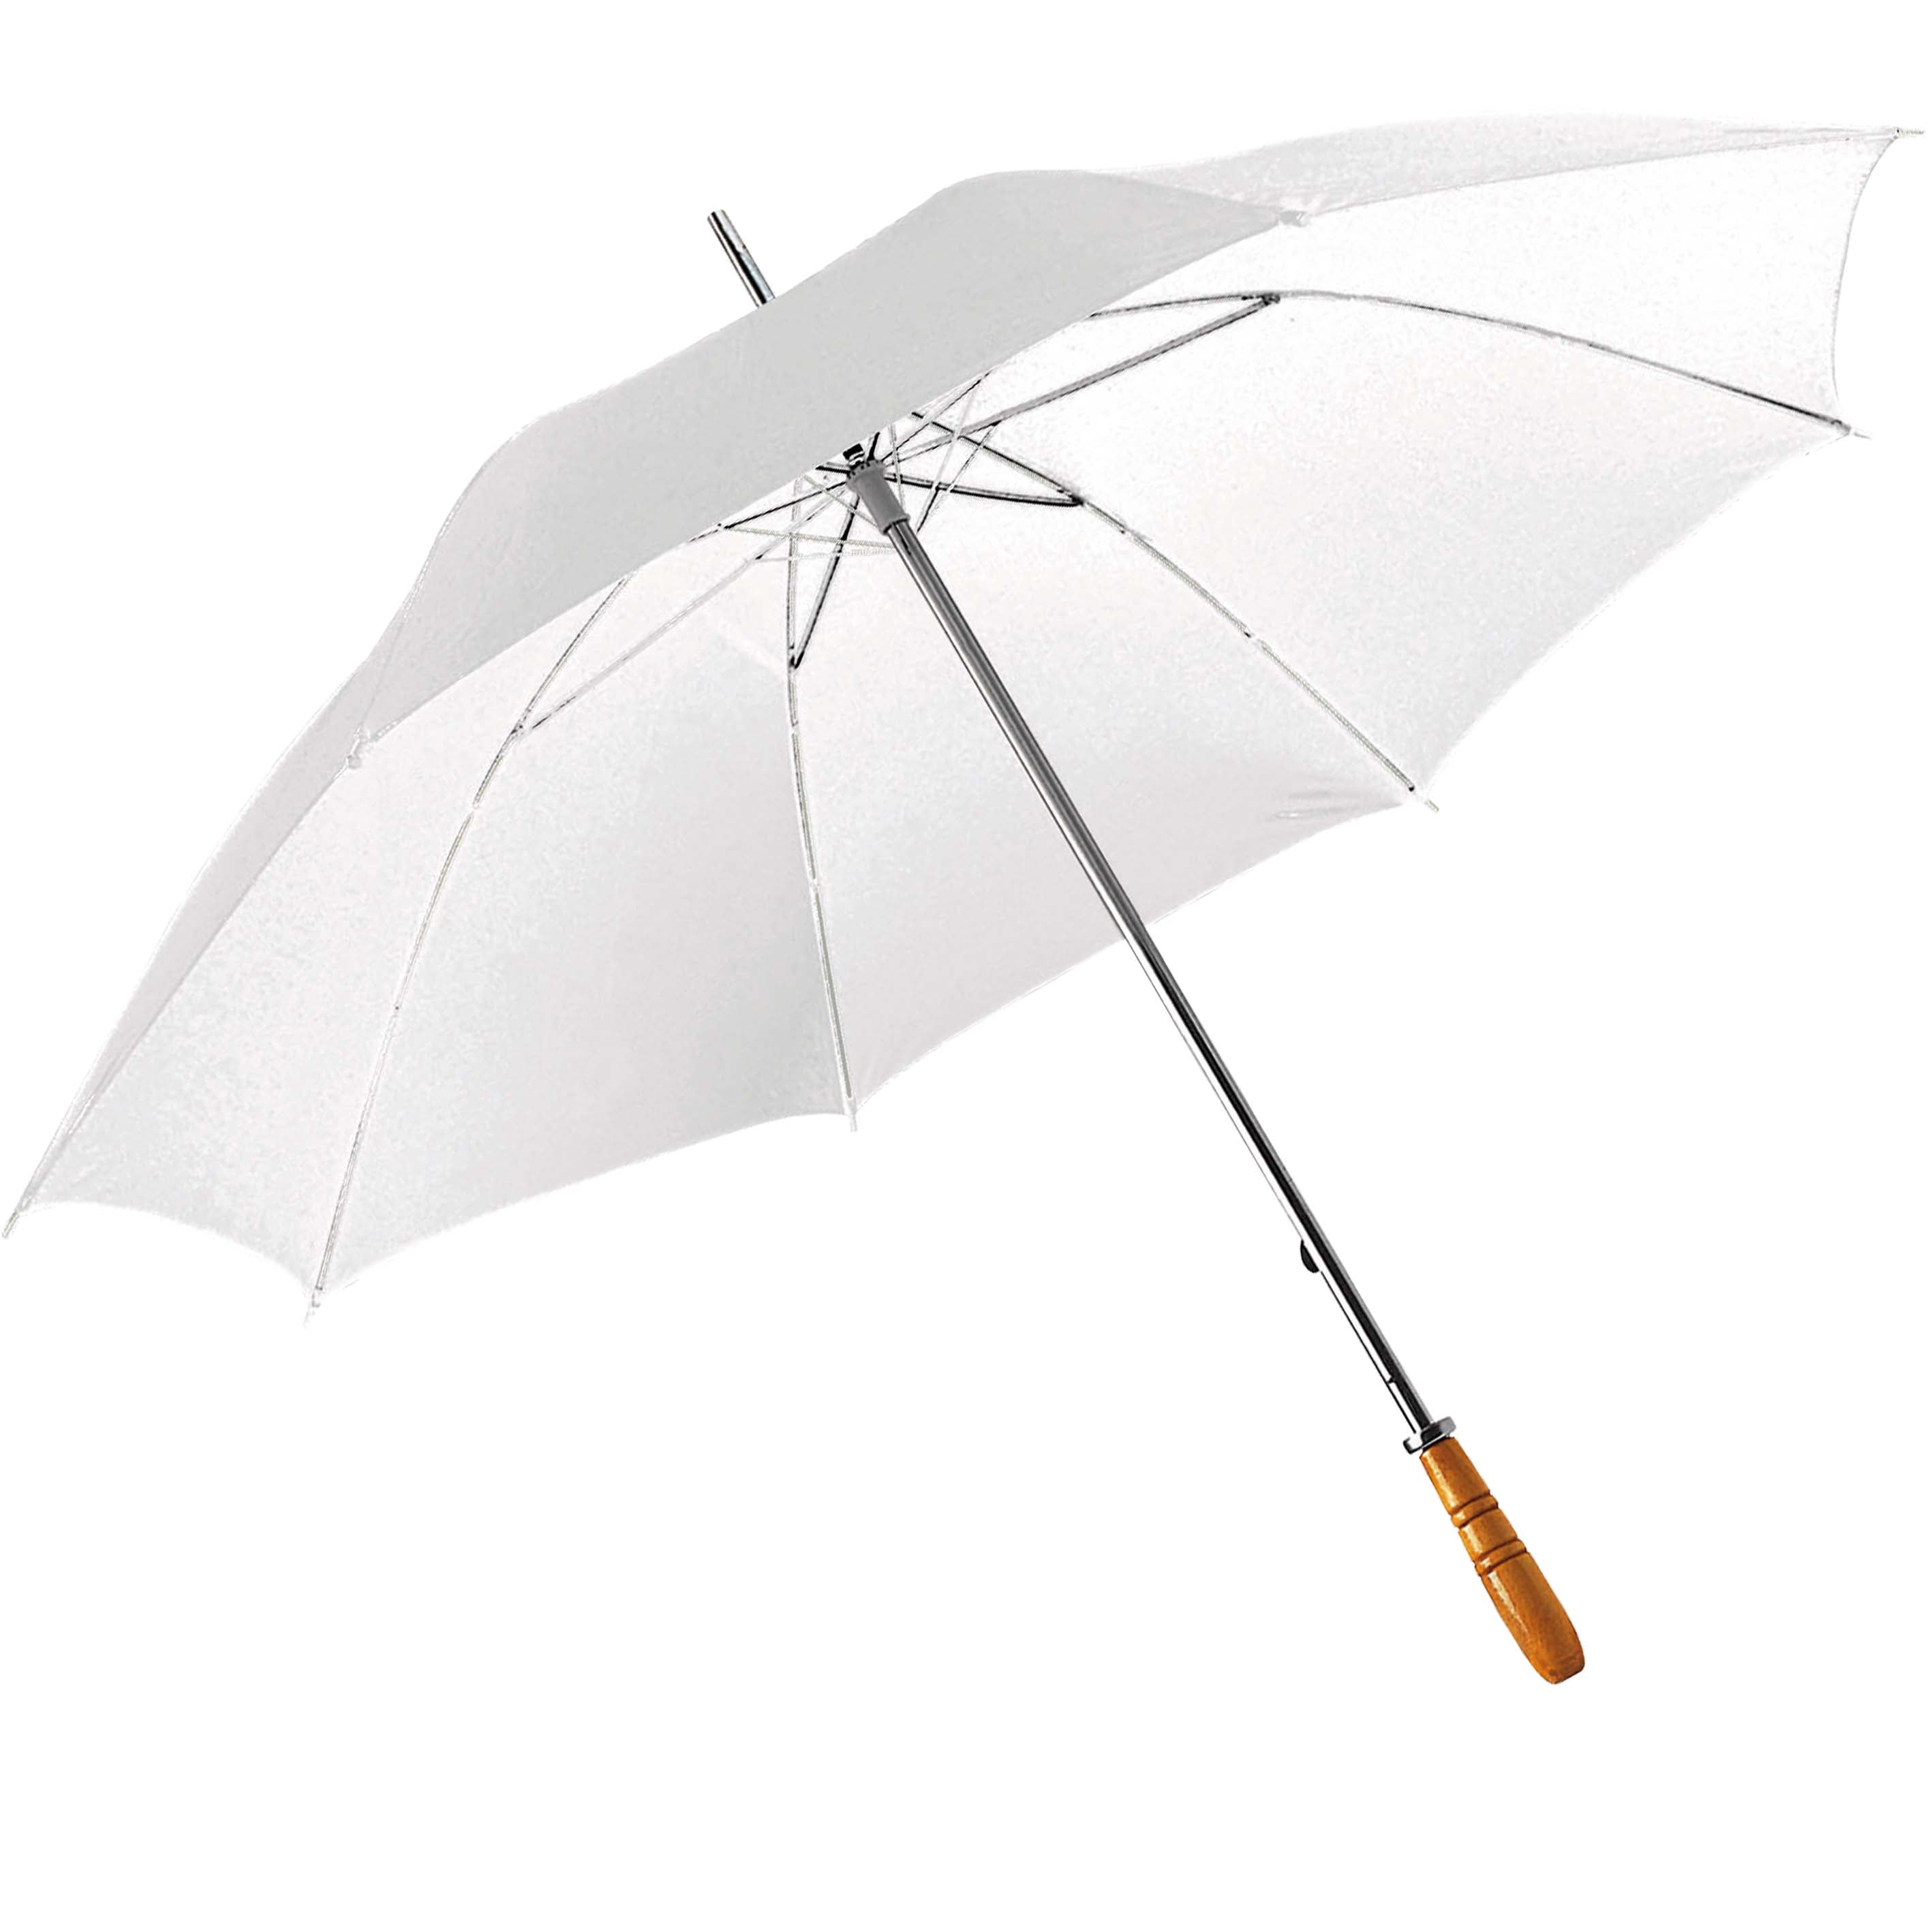 Golf umbrella with metal shaft and straight wooden handle